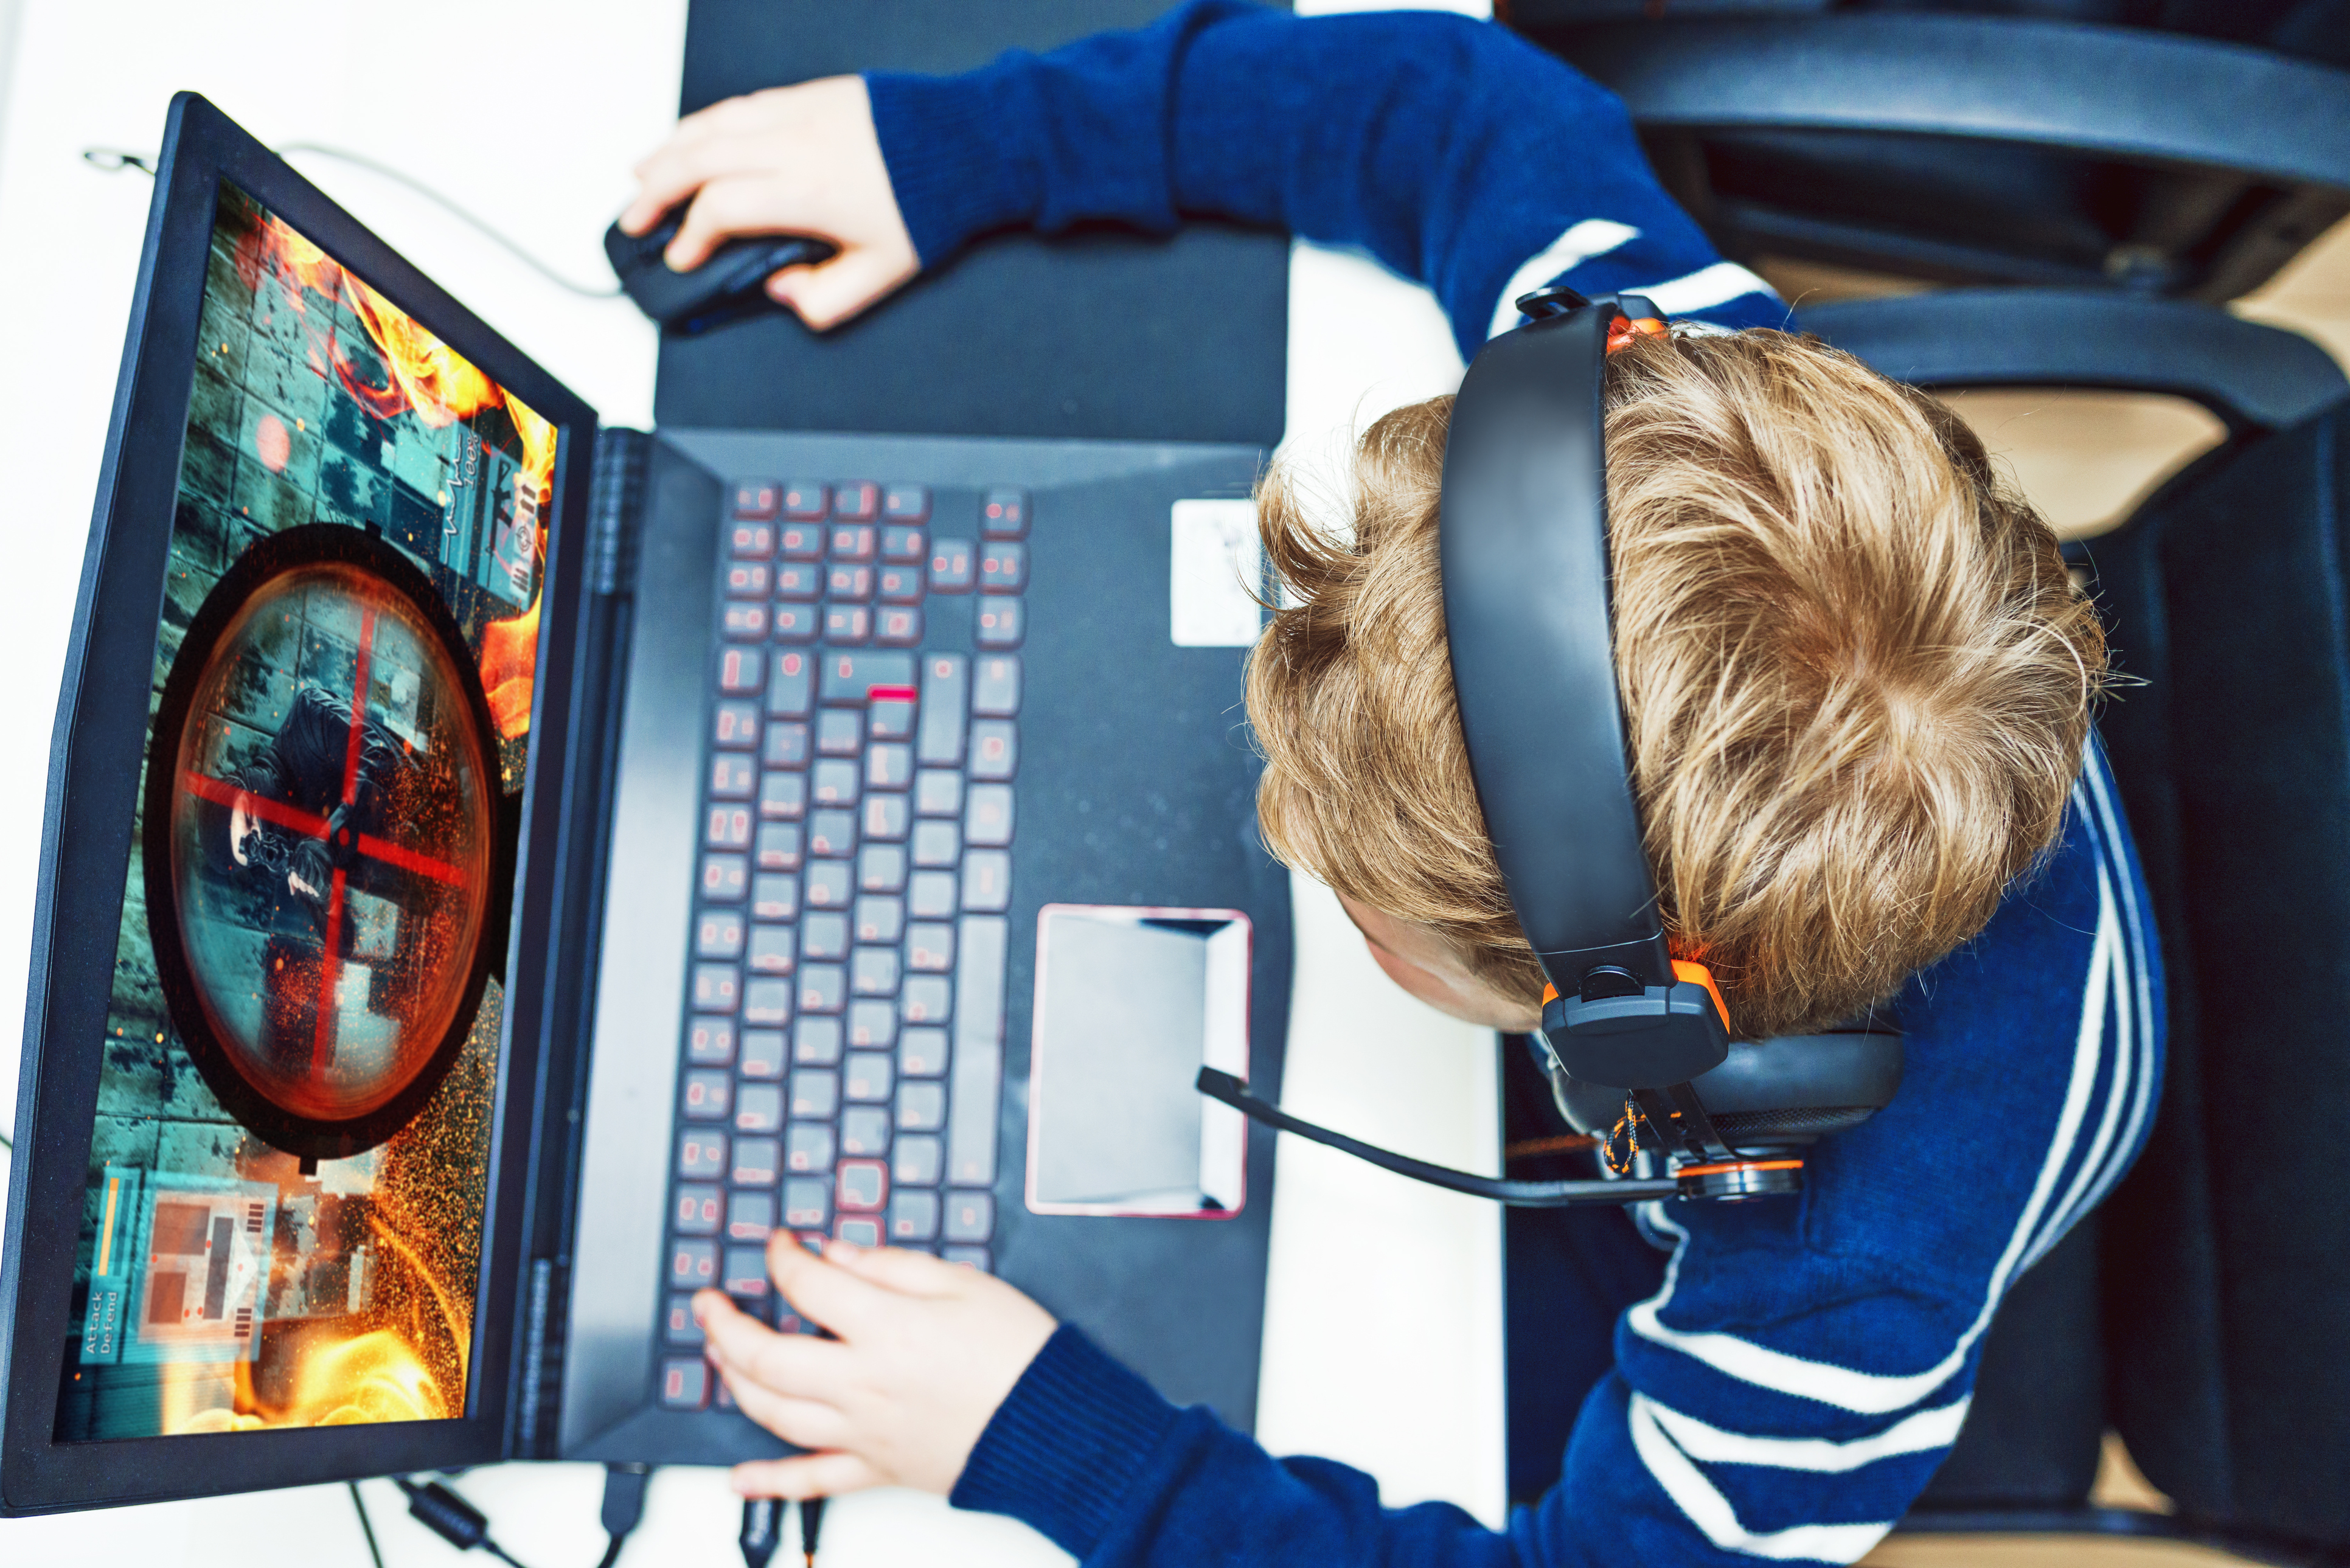 Save Your Child from Dangerous Effects of Online Games on Kids